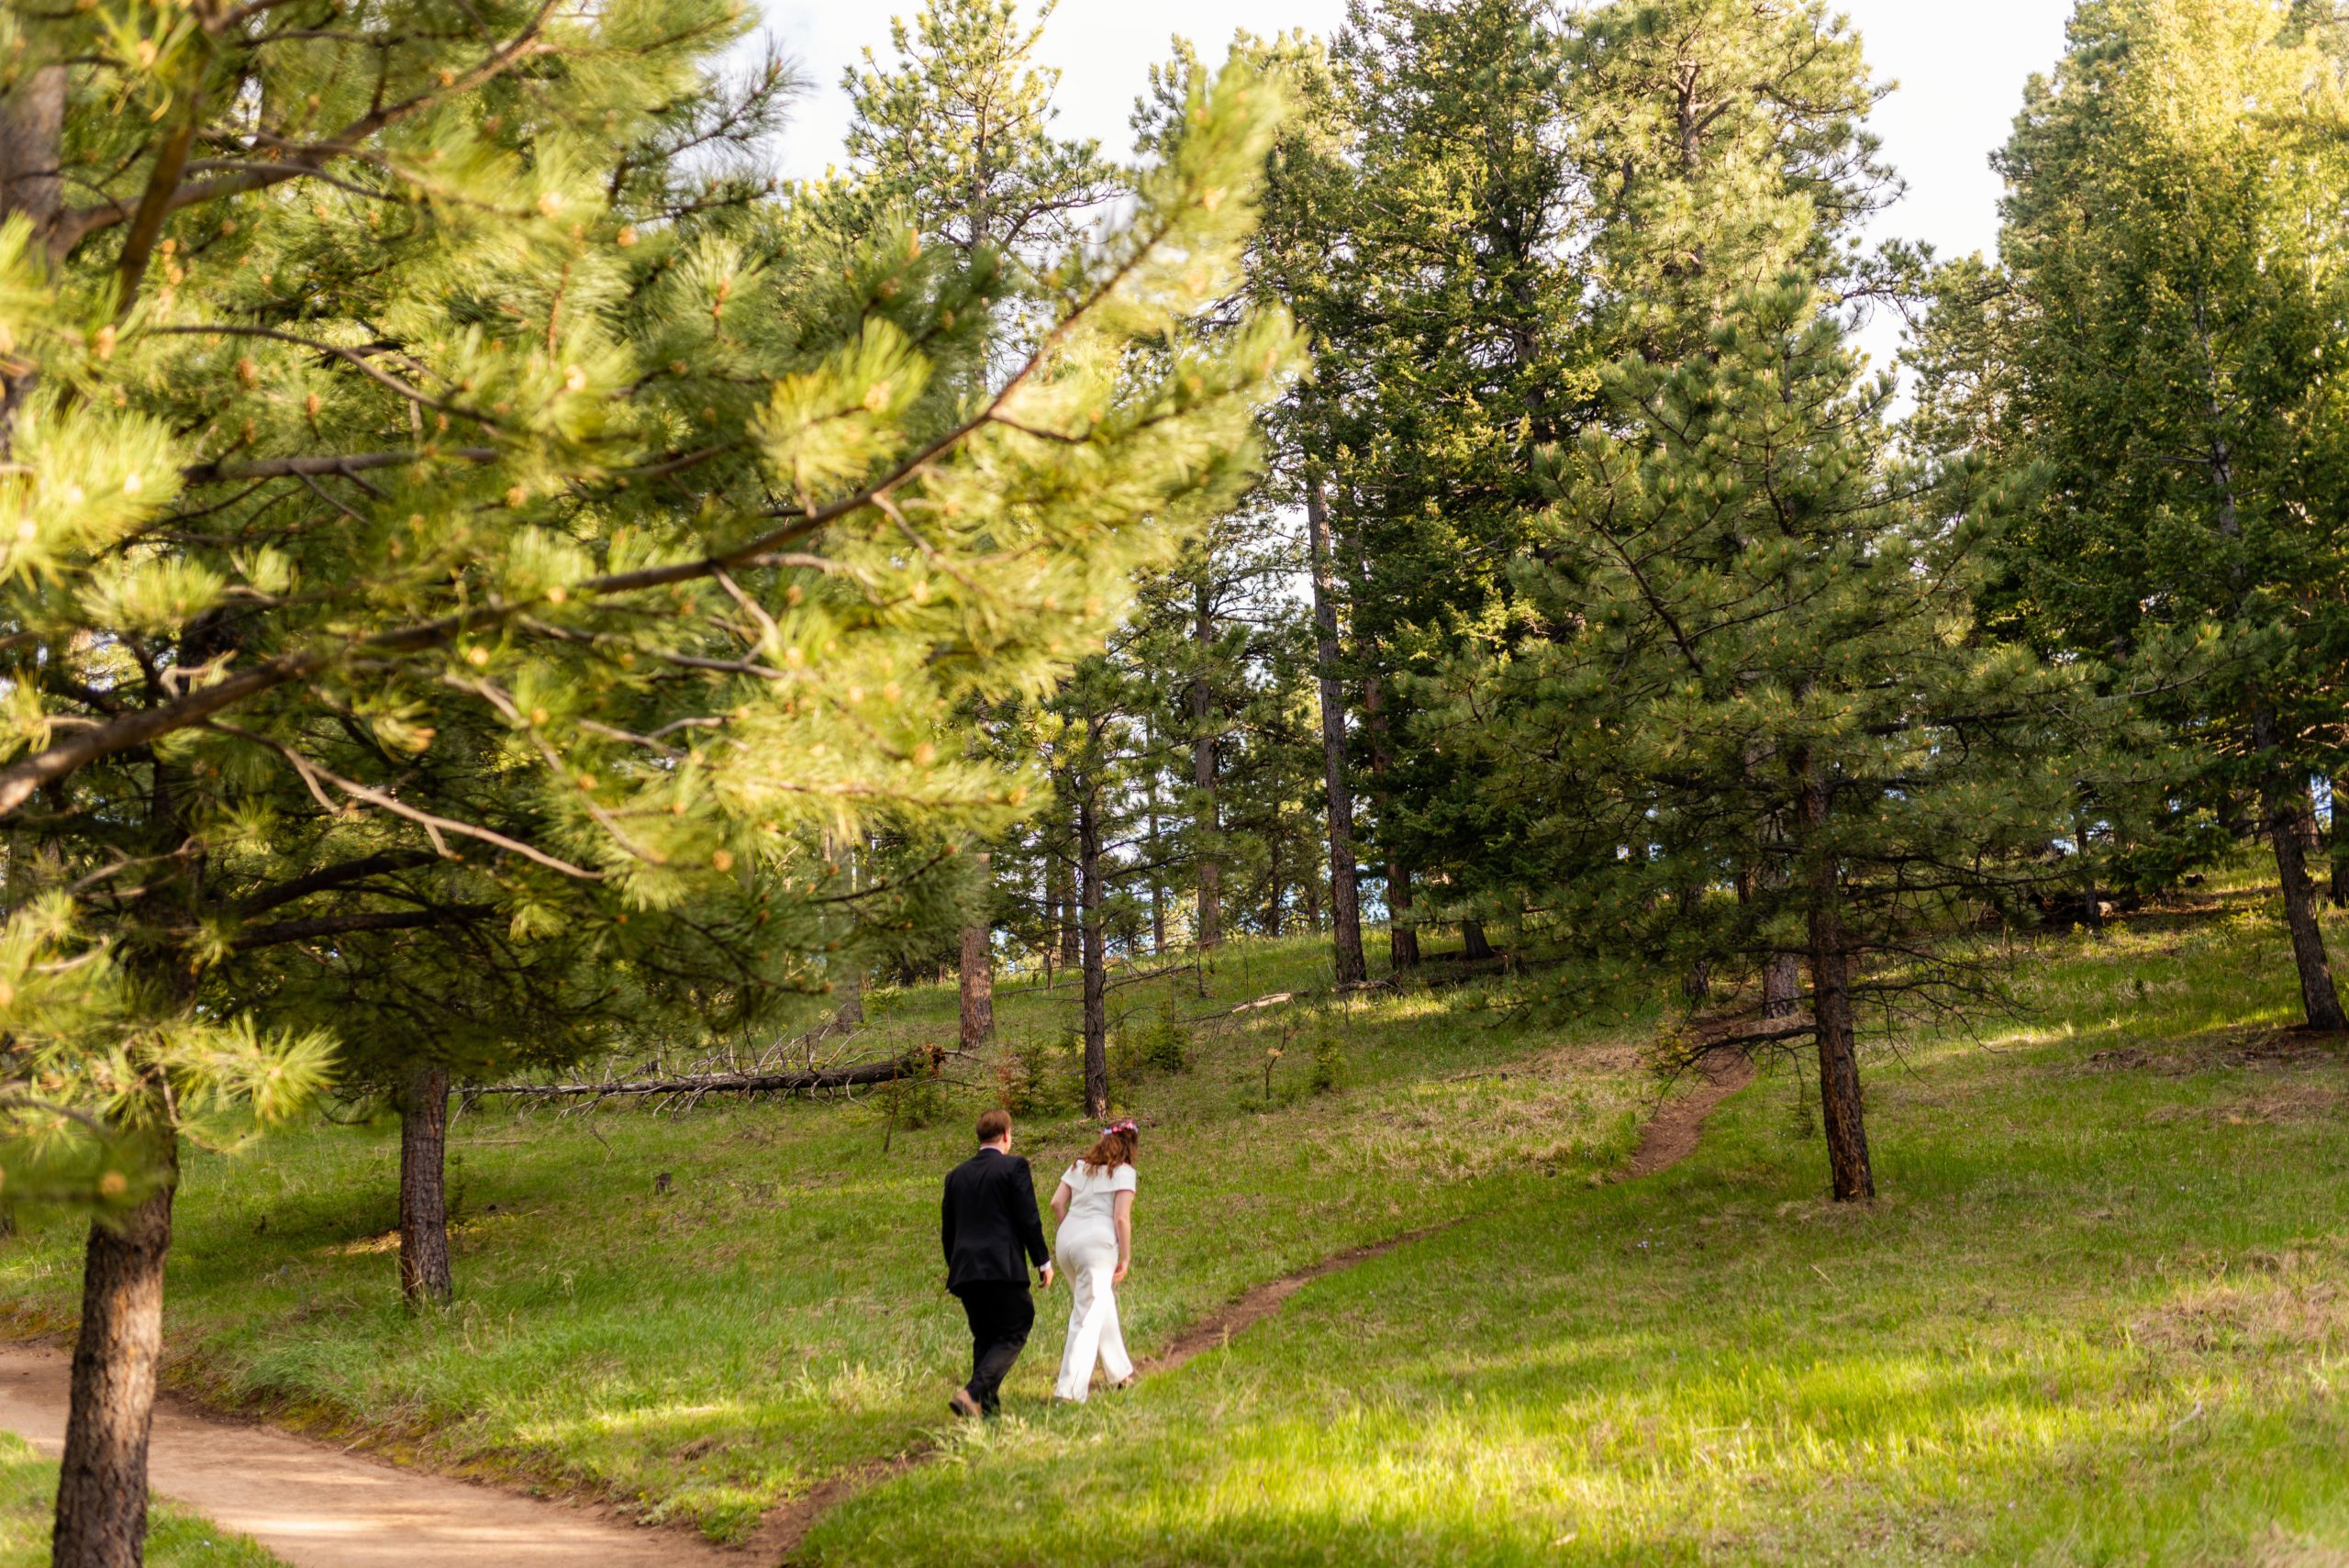 The bride and groom walking the trail during their Boulder hiking elopement near realization point..